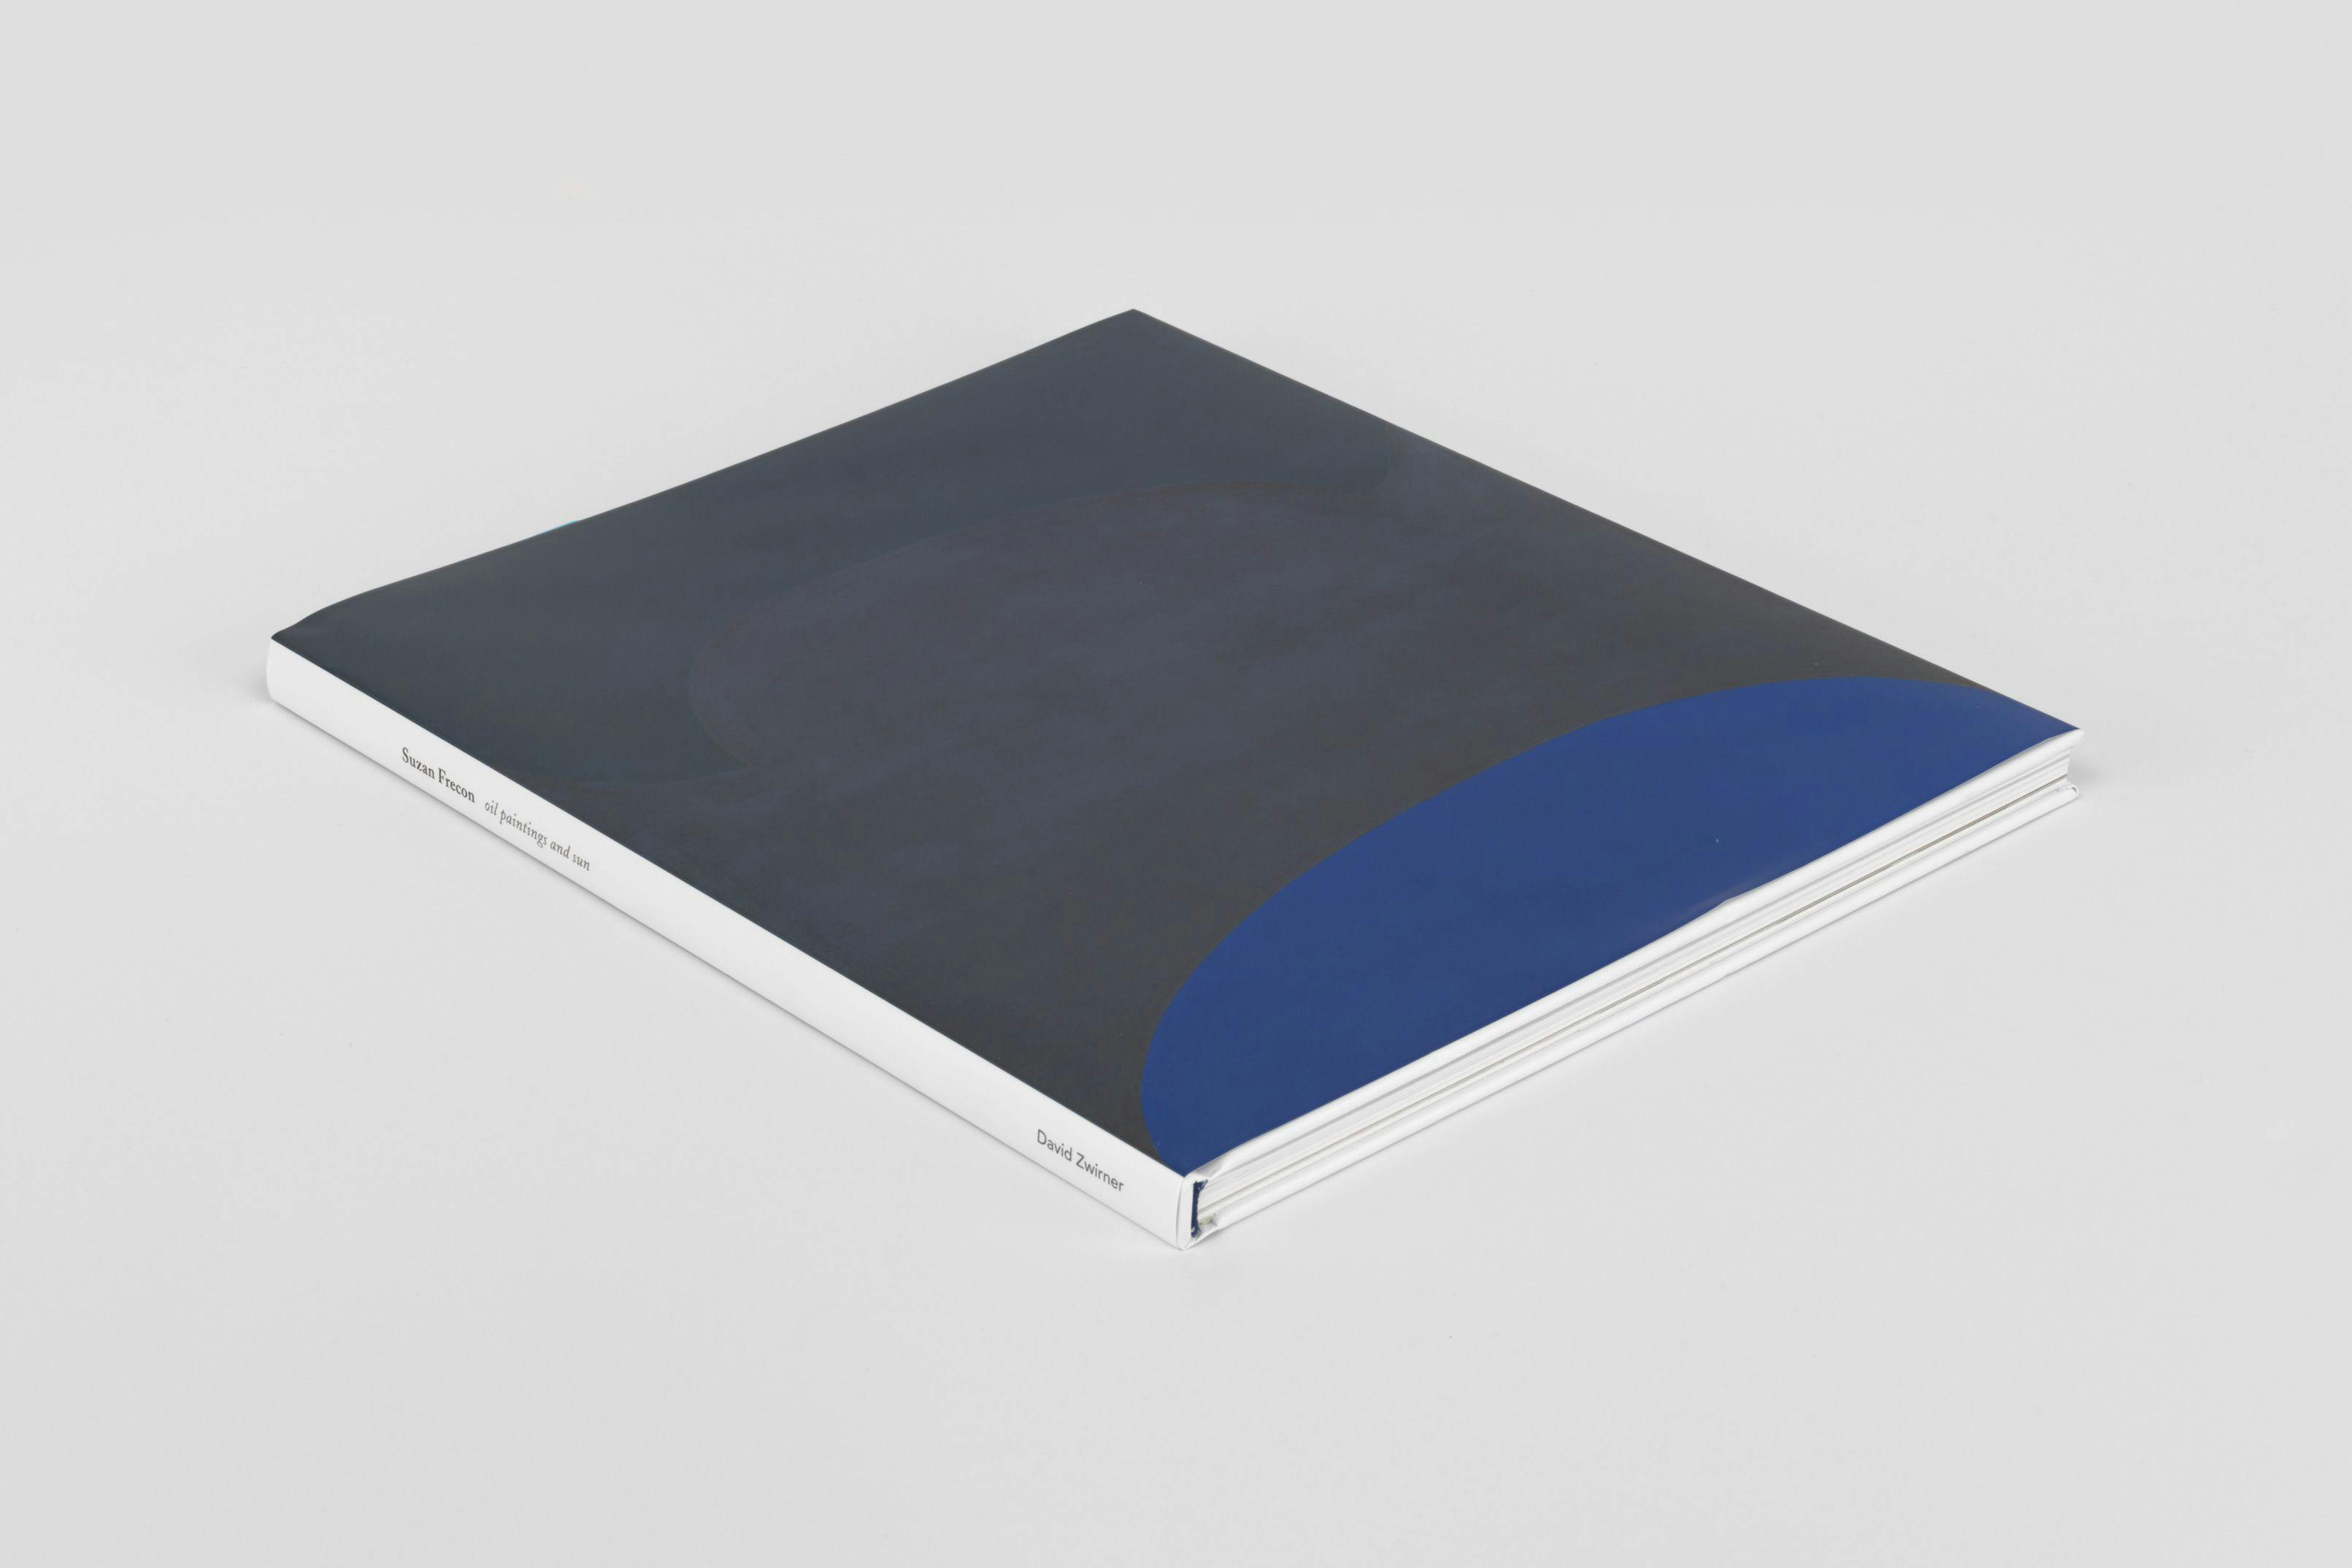 Cover of a book titled oil paintings and sun, published by David Zwirner Books in 2015.